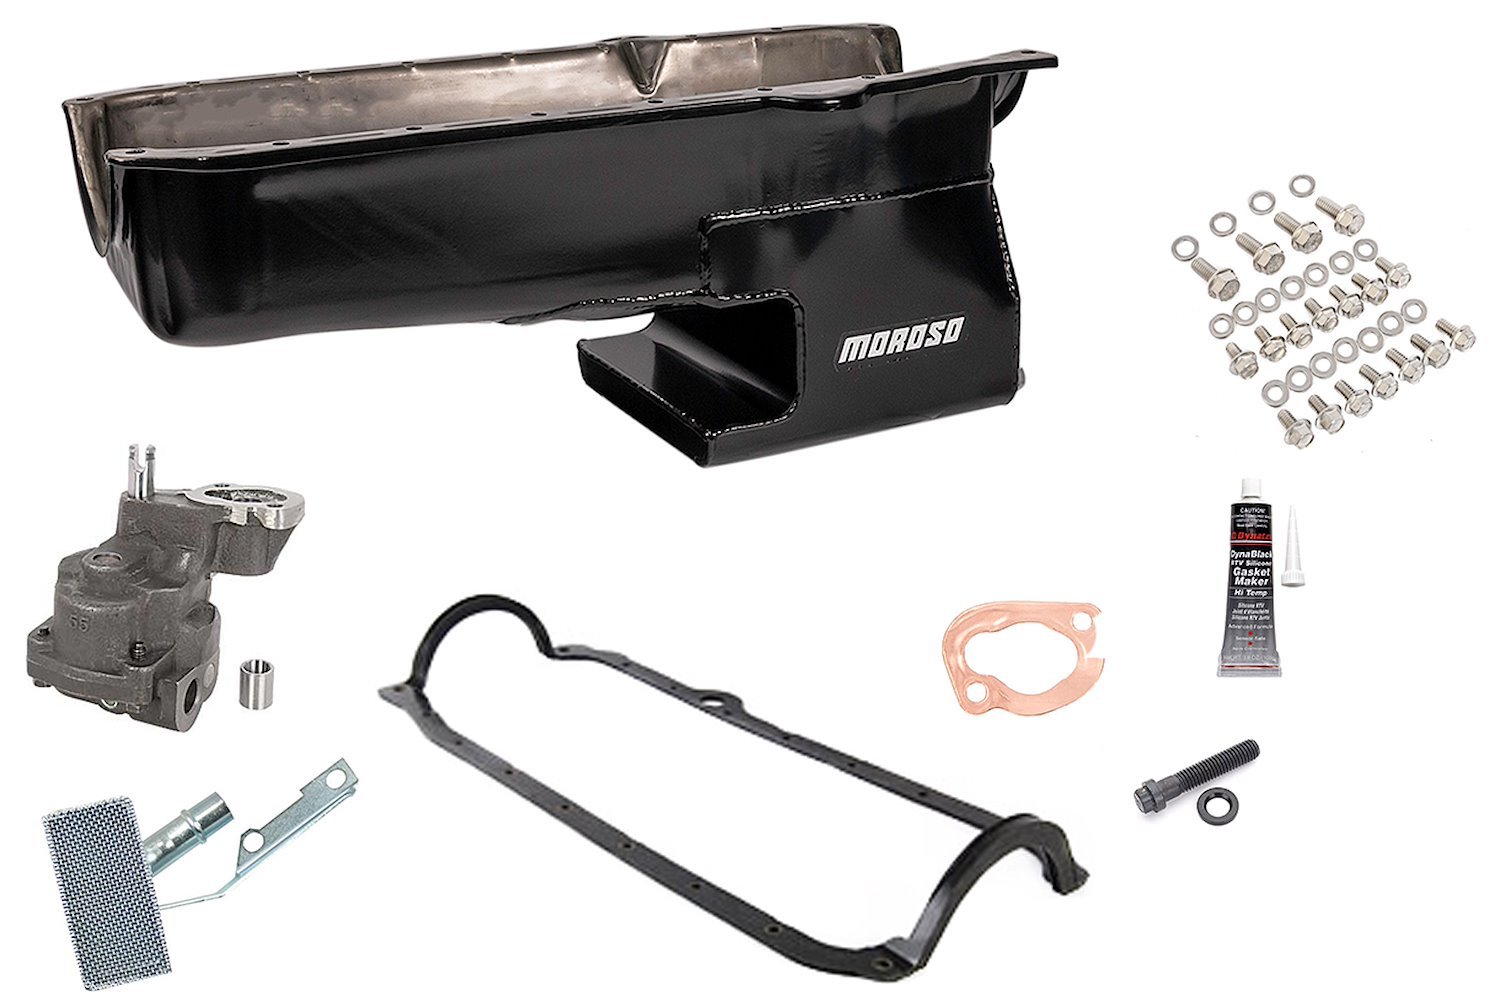 Street/Strip Oil Pan Kit for 1986-Up Small Block Chevy